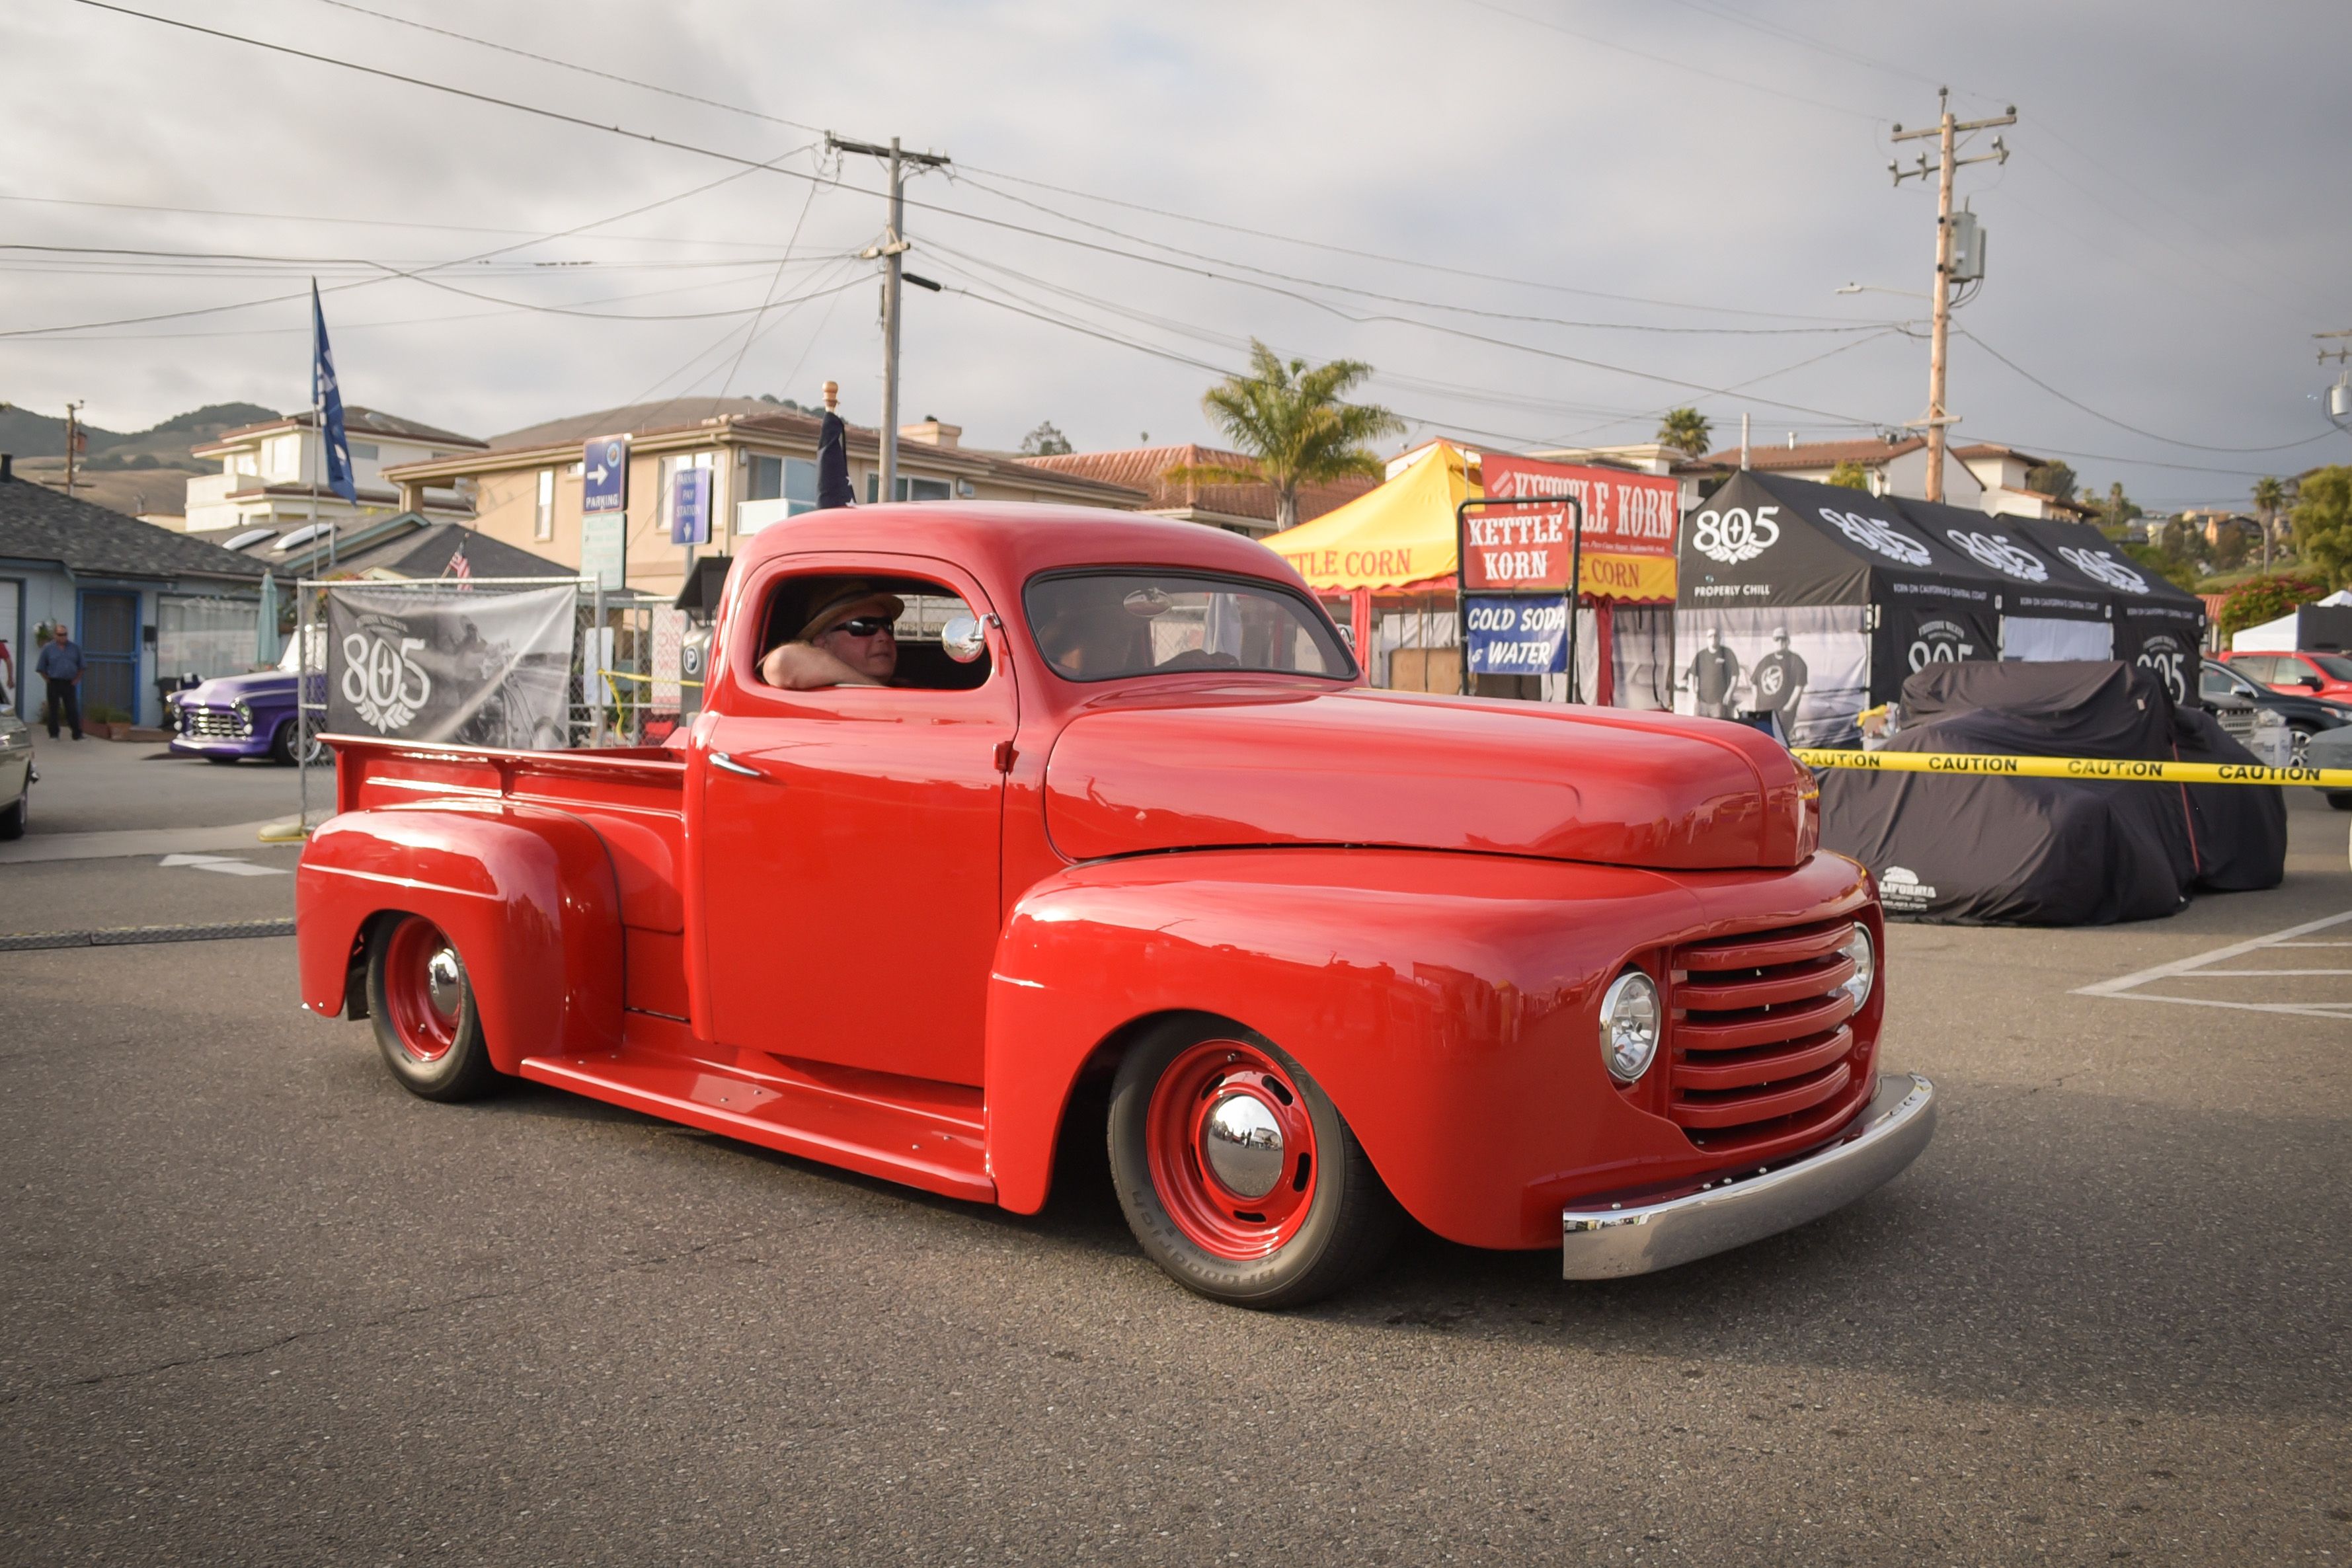 The Classic at Pismo Beach Car Show May 31 June 2, 2019